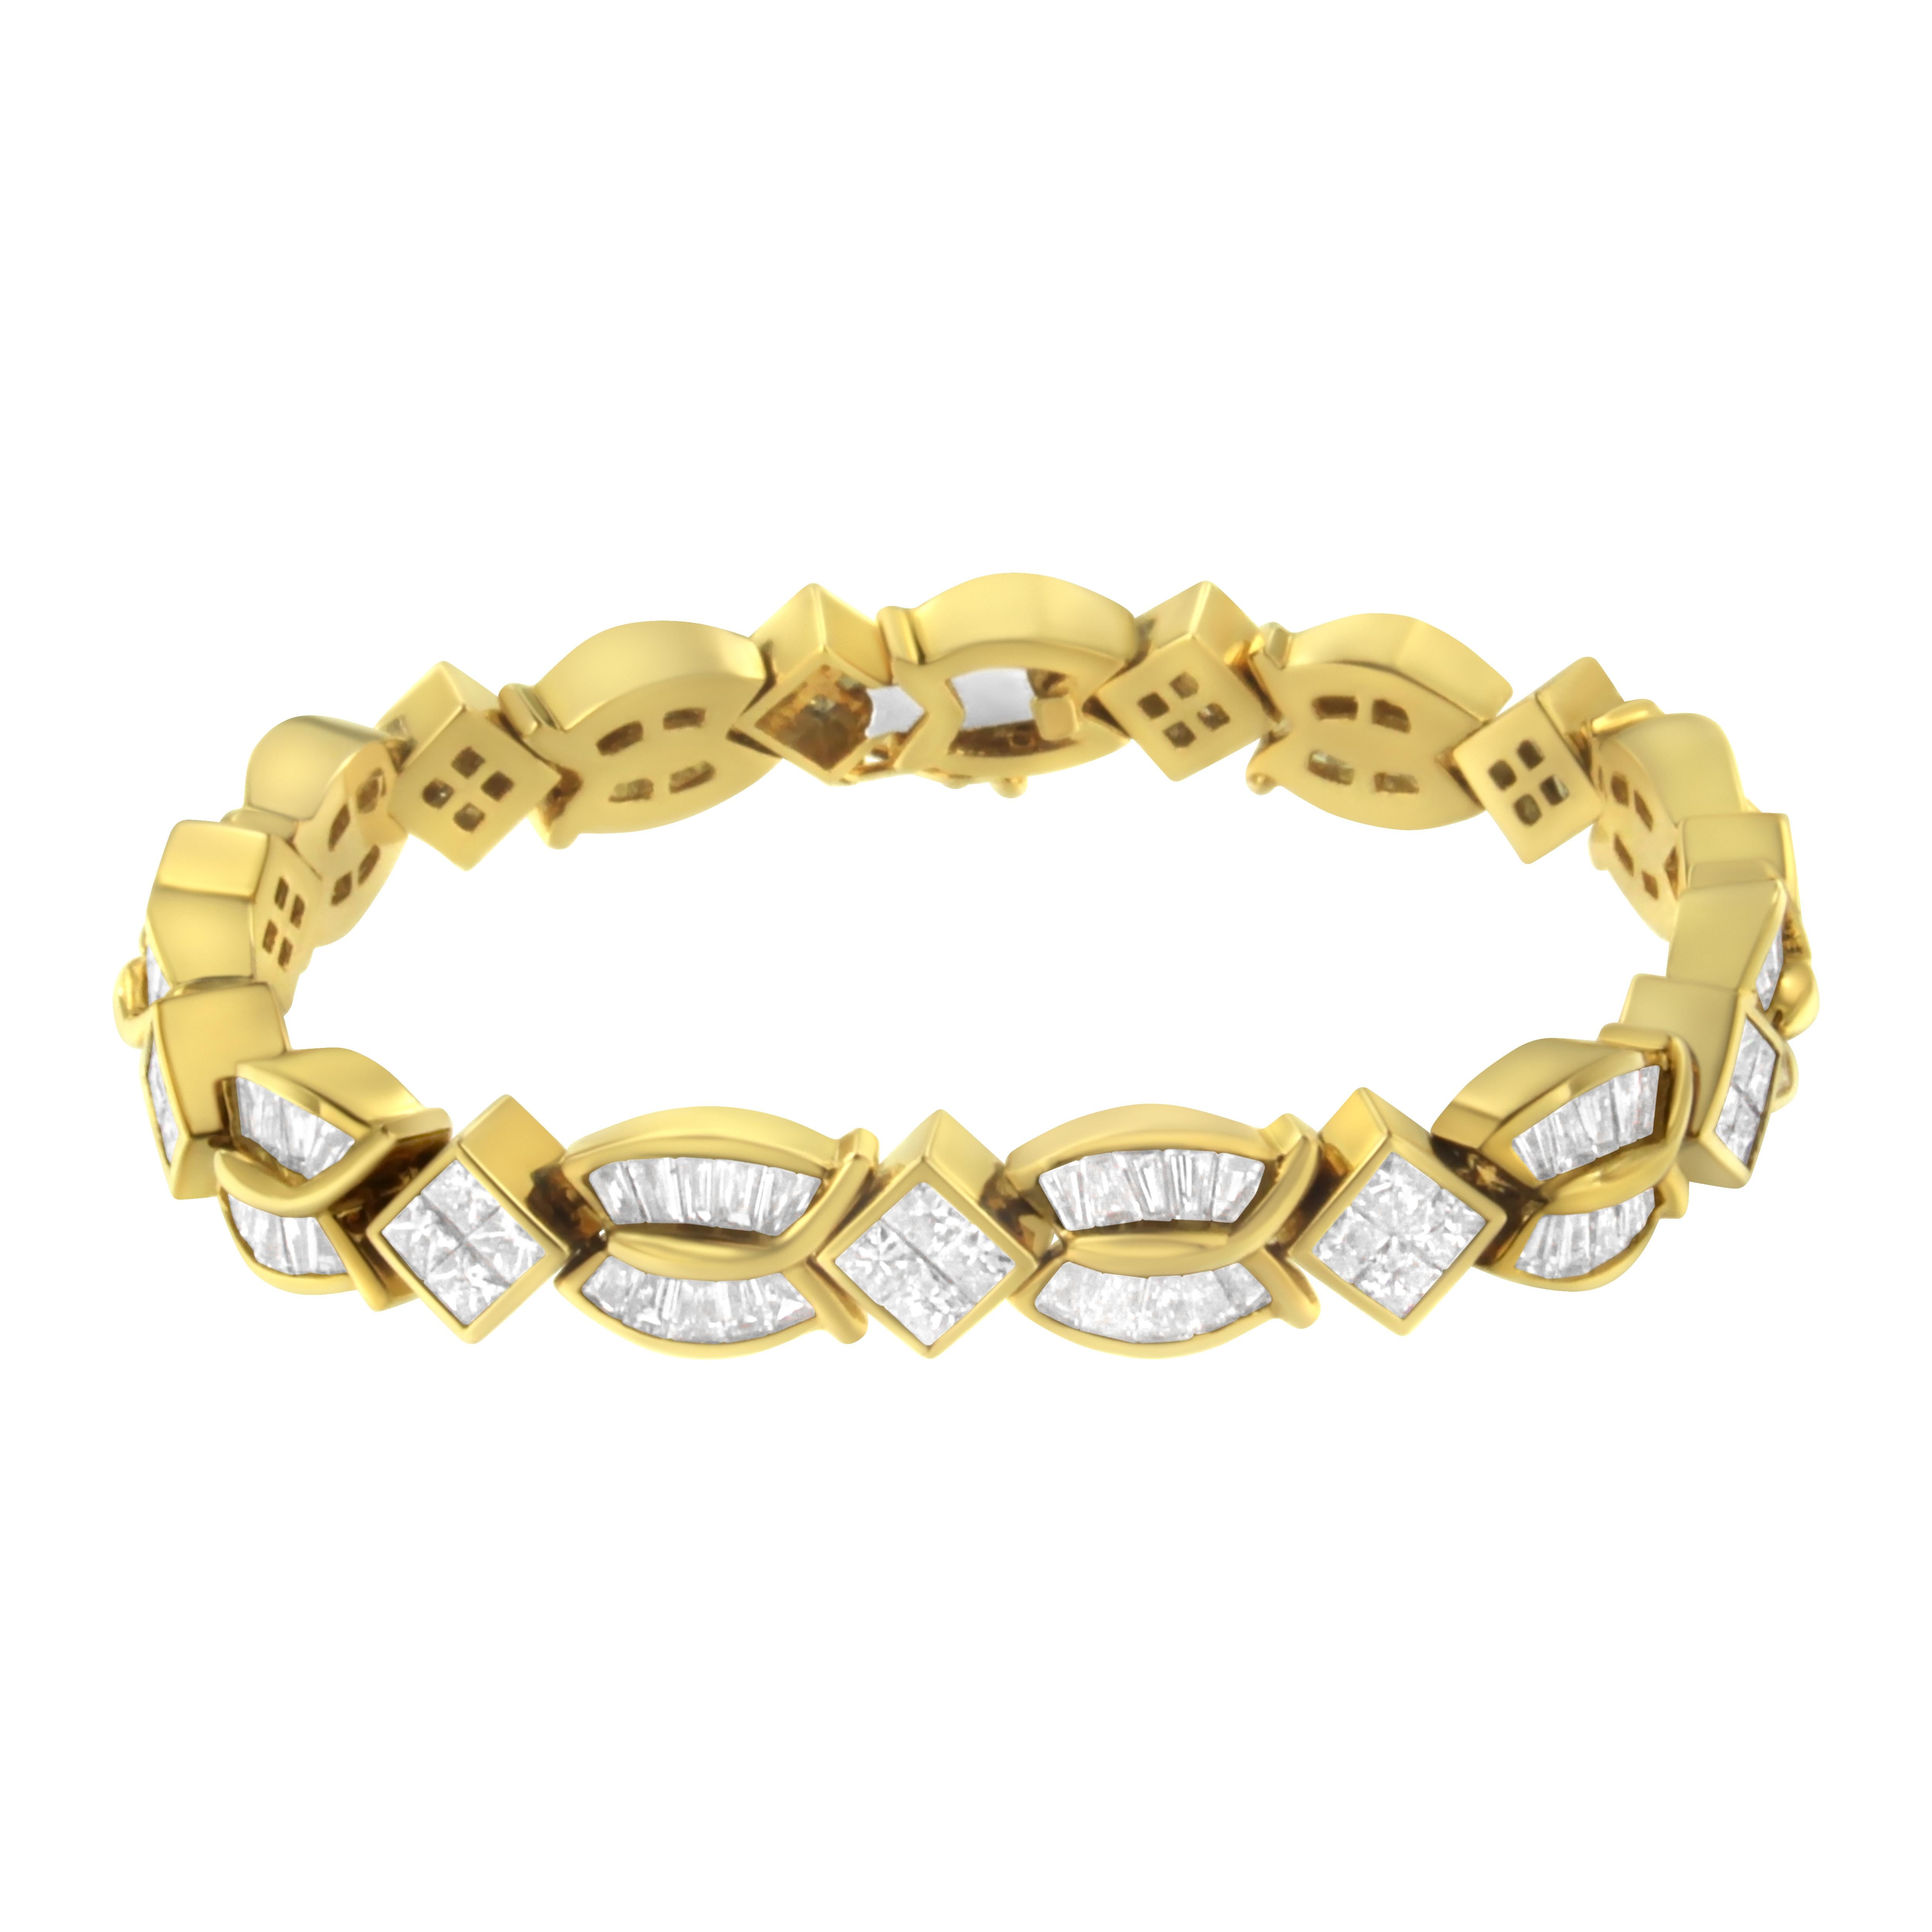 The rich texture of this 14 karat yellow gold bracelet is what makes it so uniquely charming. Featuring over 8 carats of princess and baguette cut diamonds, each intricate twist and turn was designed to catch the light, inspiring plenty of envious